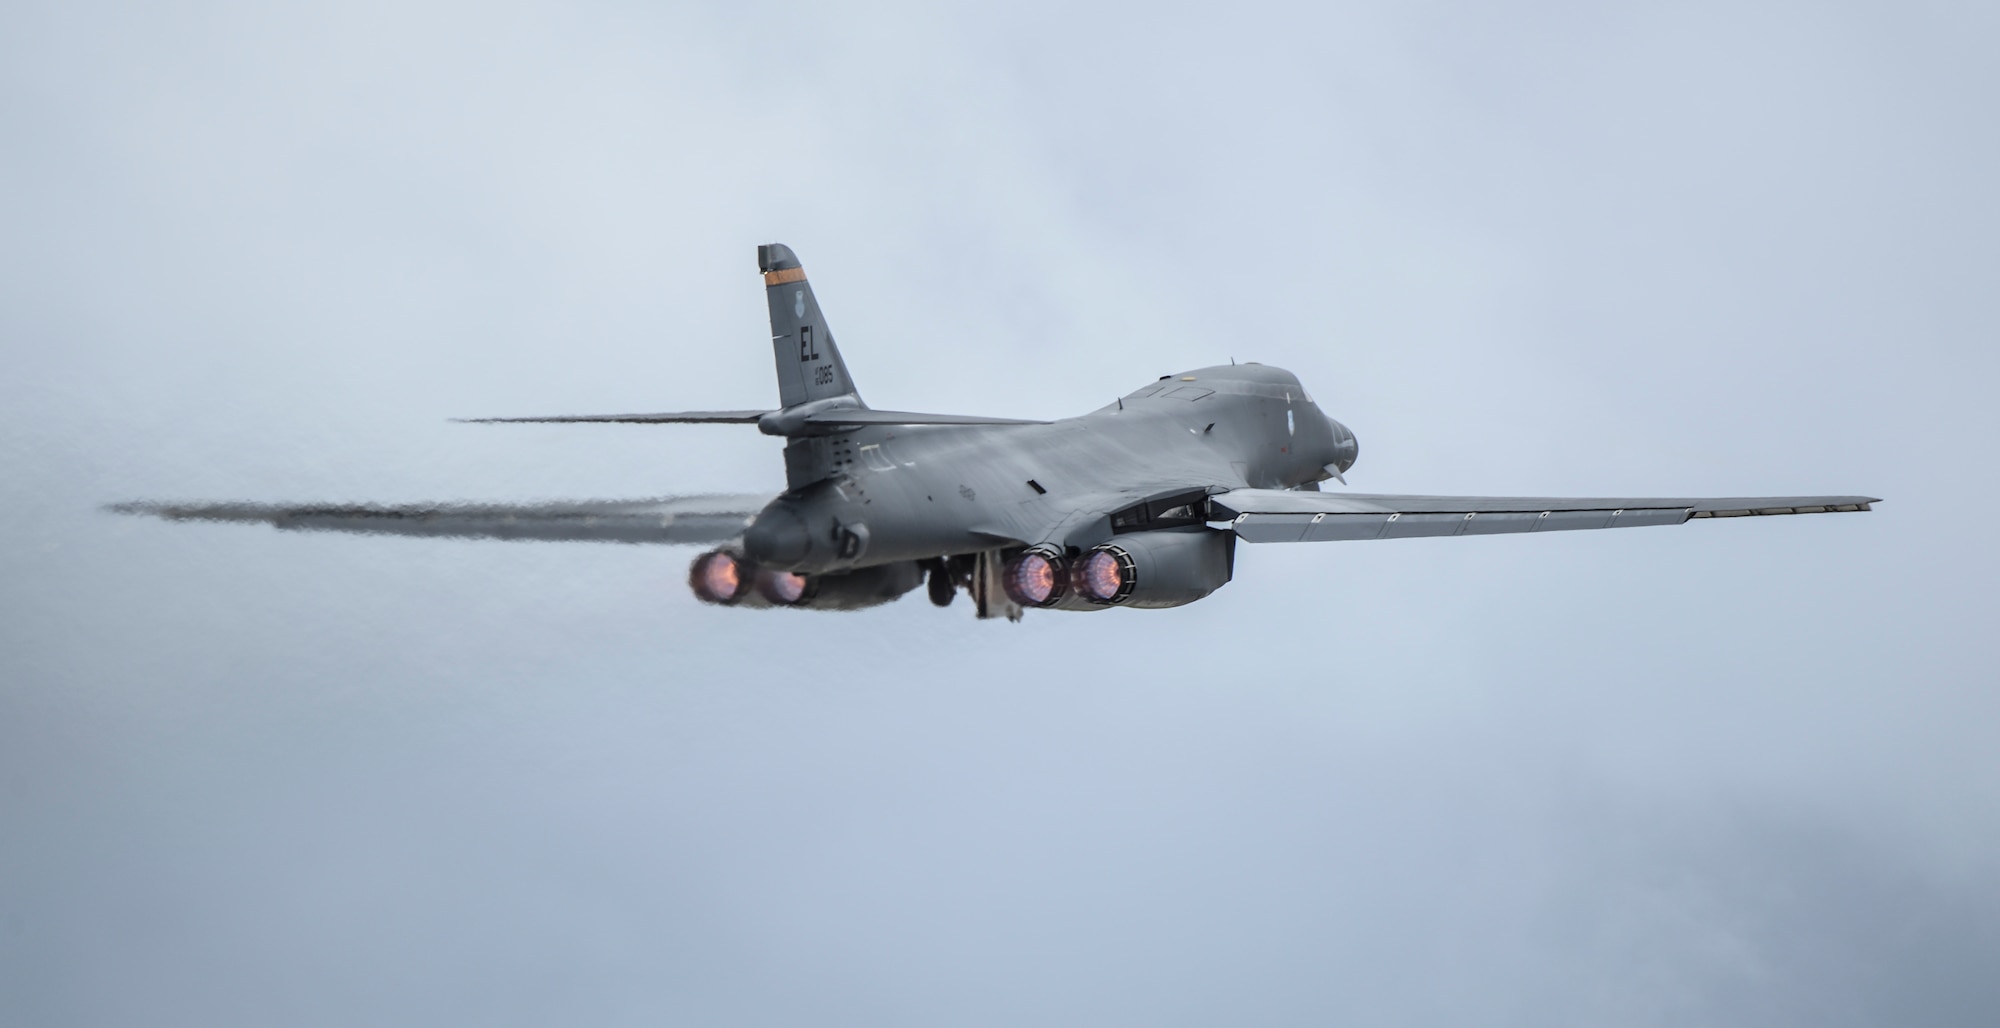 A U.S. Air Force B-1B Lancer assigned to the 34th Expeditionary Bomb Squadron, deployed from Ellsworth Air Force Base, S.D., takes off during Exercise Valiant Shield at Andersen AFB, Guam, Sept. 14, 2016. Valiant Shield is a biennial U.S. Air Force, Navy and Marine Corps exercise held in Guam, focusing on real-world proficiency in sustaining joint forces at sea, in the air, on land and in cyberspace. (U.S. Air Force photo by Tech. Sgt. Richard P. Ebensberger)